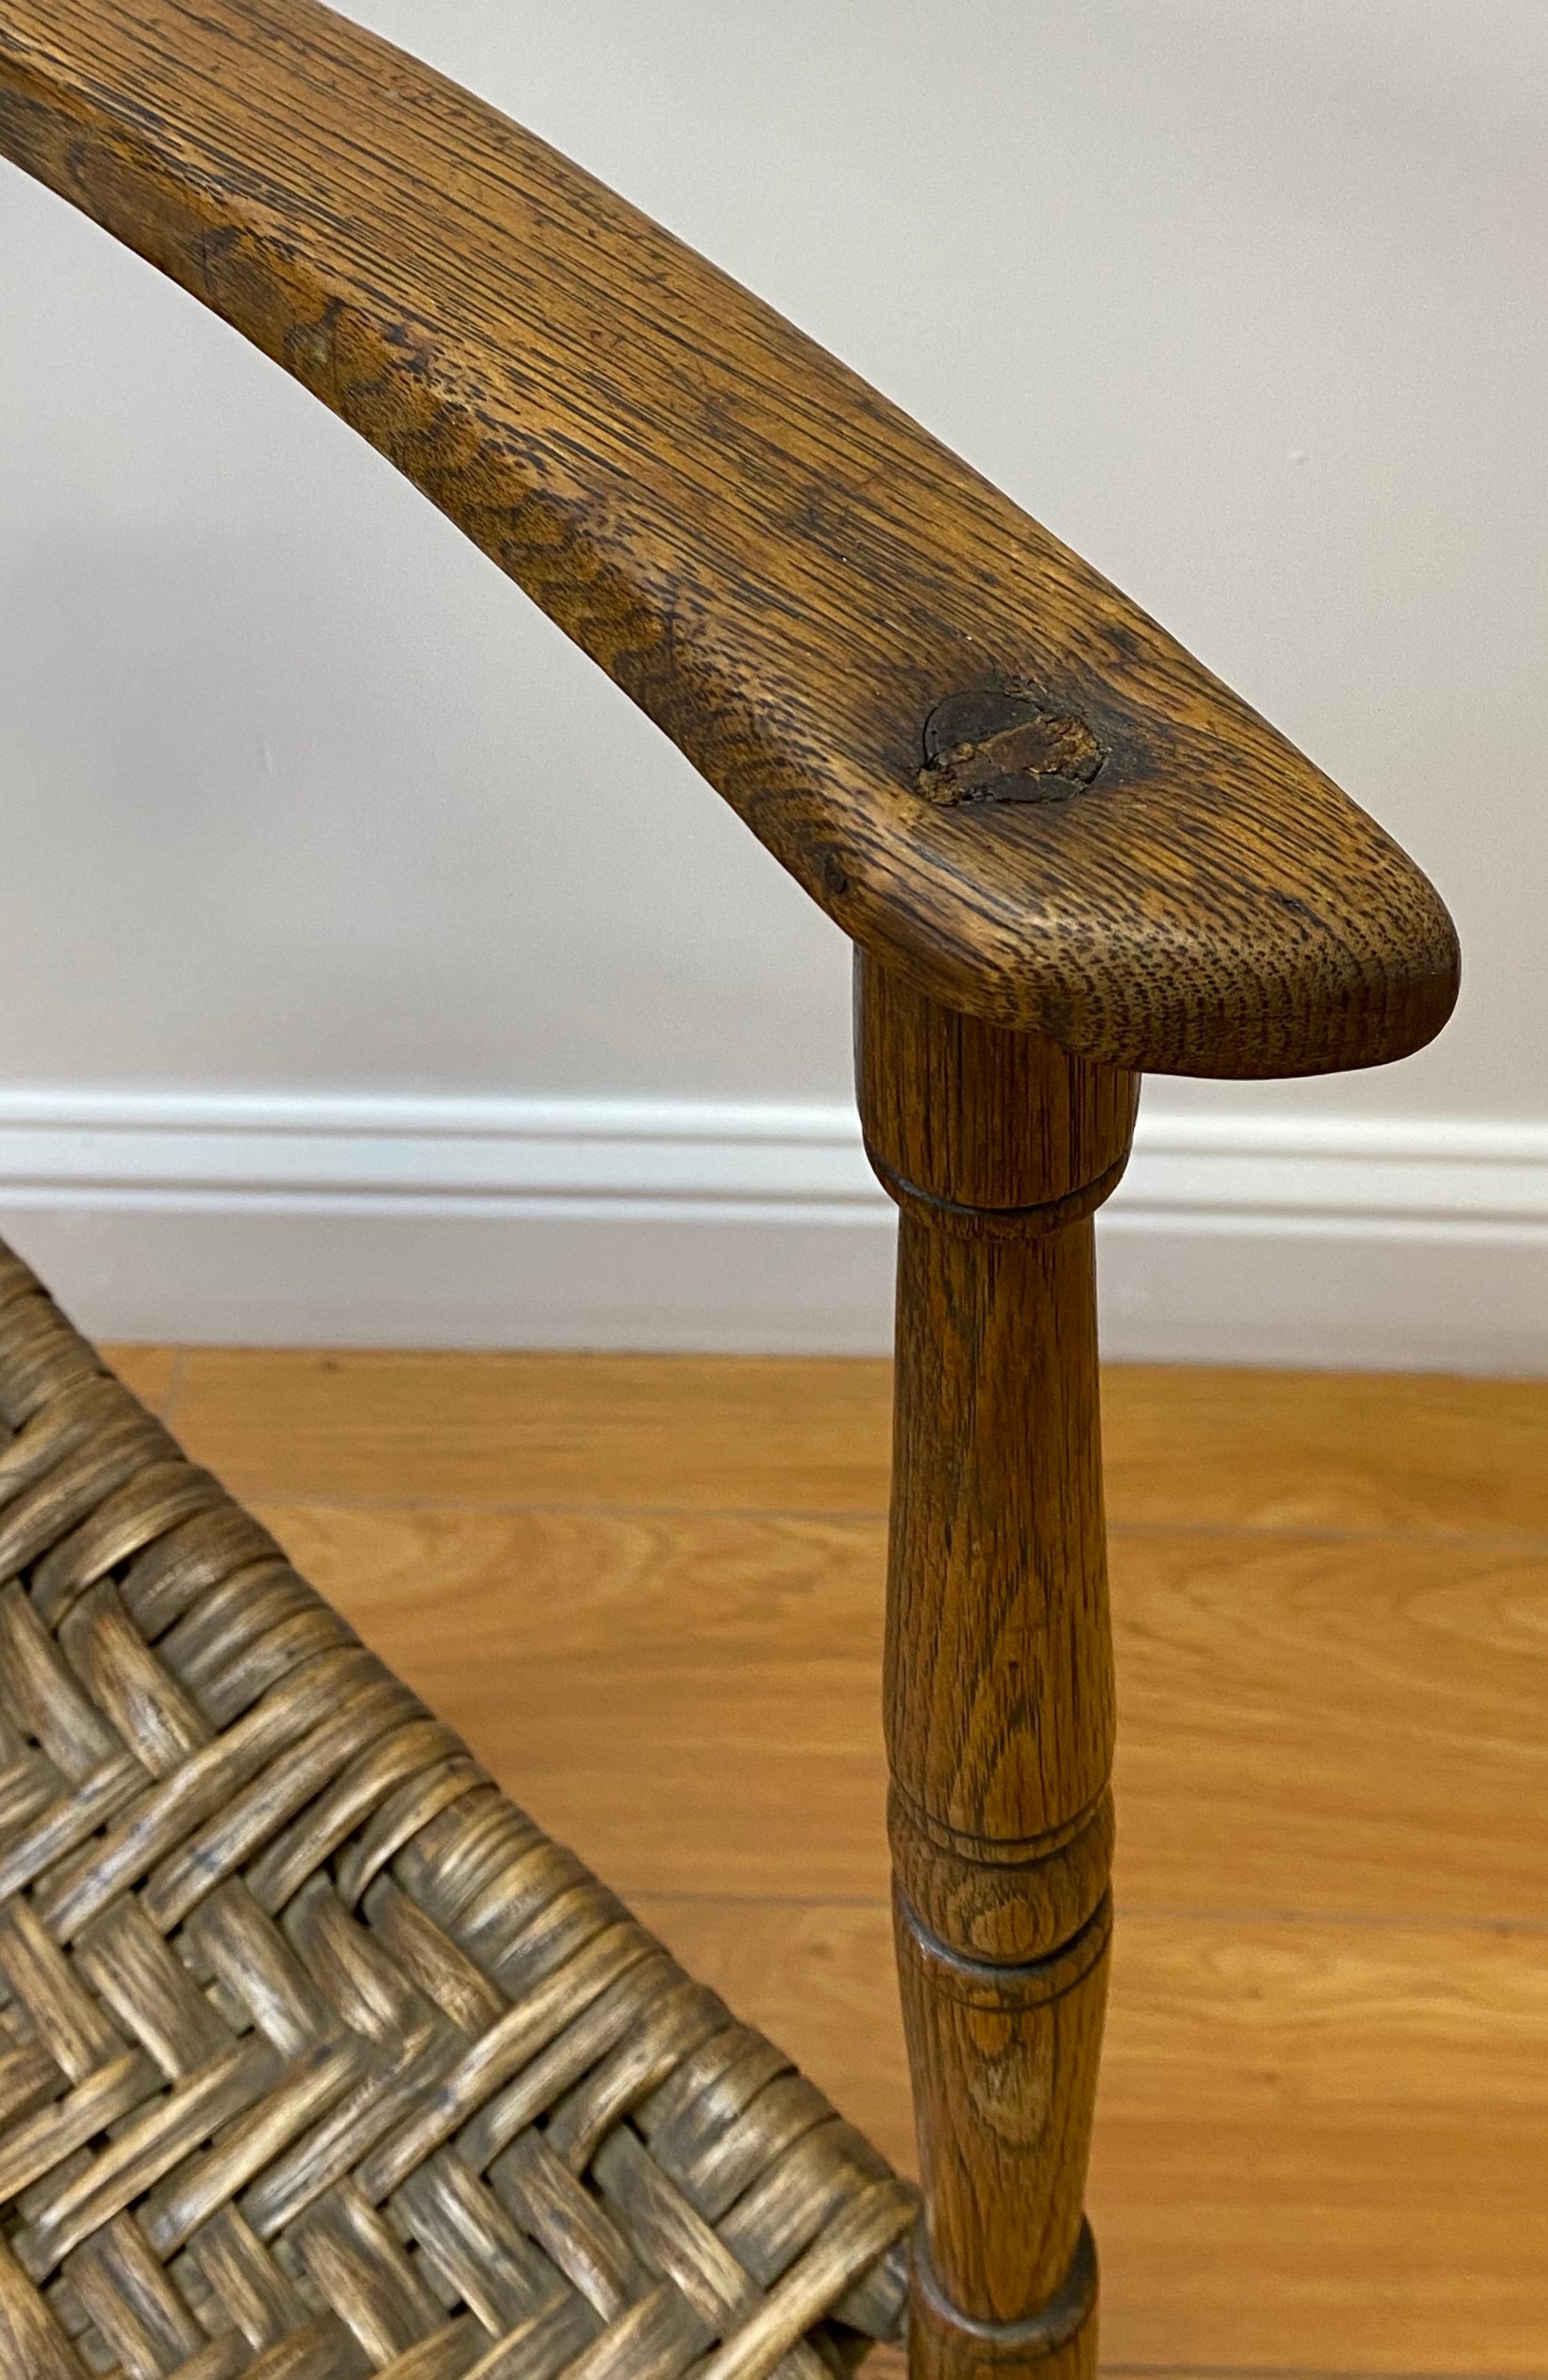 18th to 19th Century Ladder Back Chair with Reed Seat 2